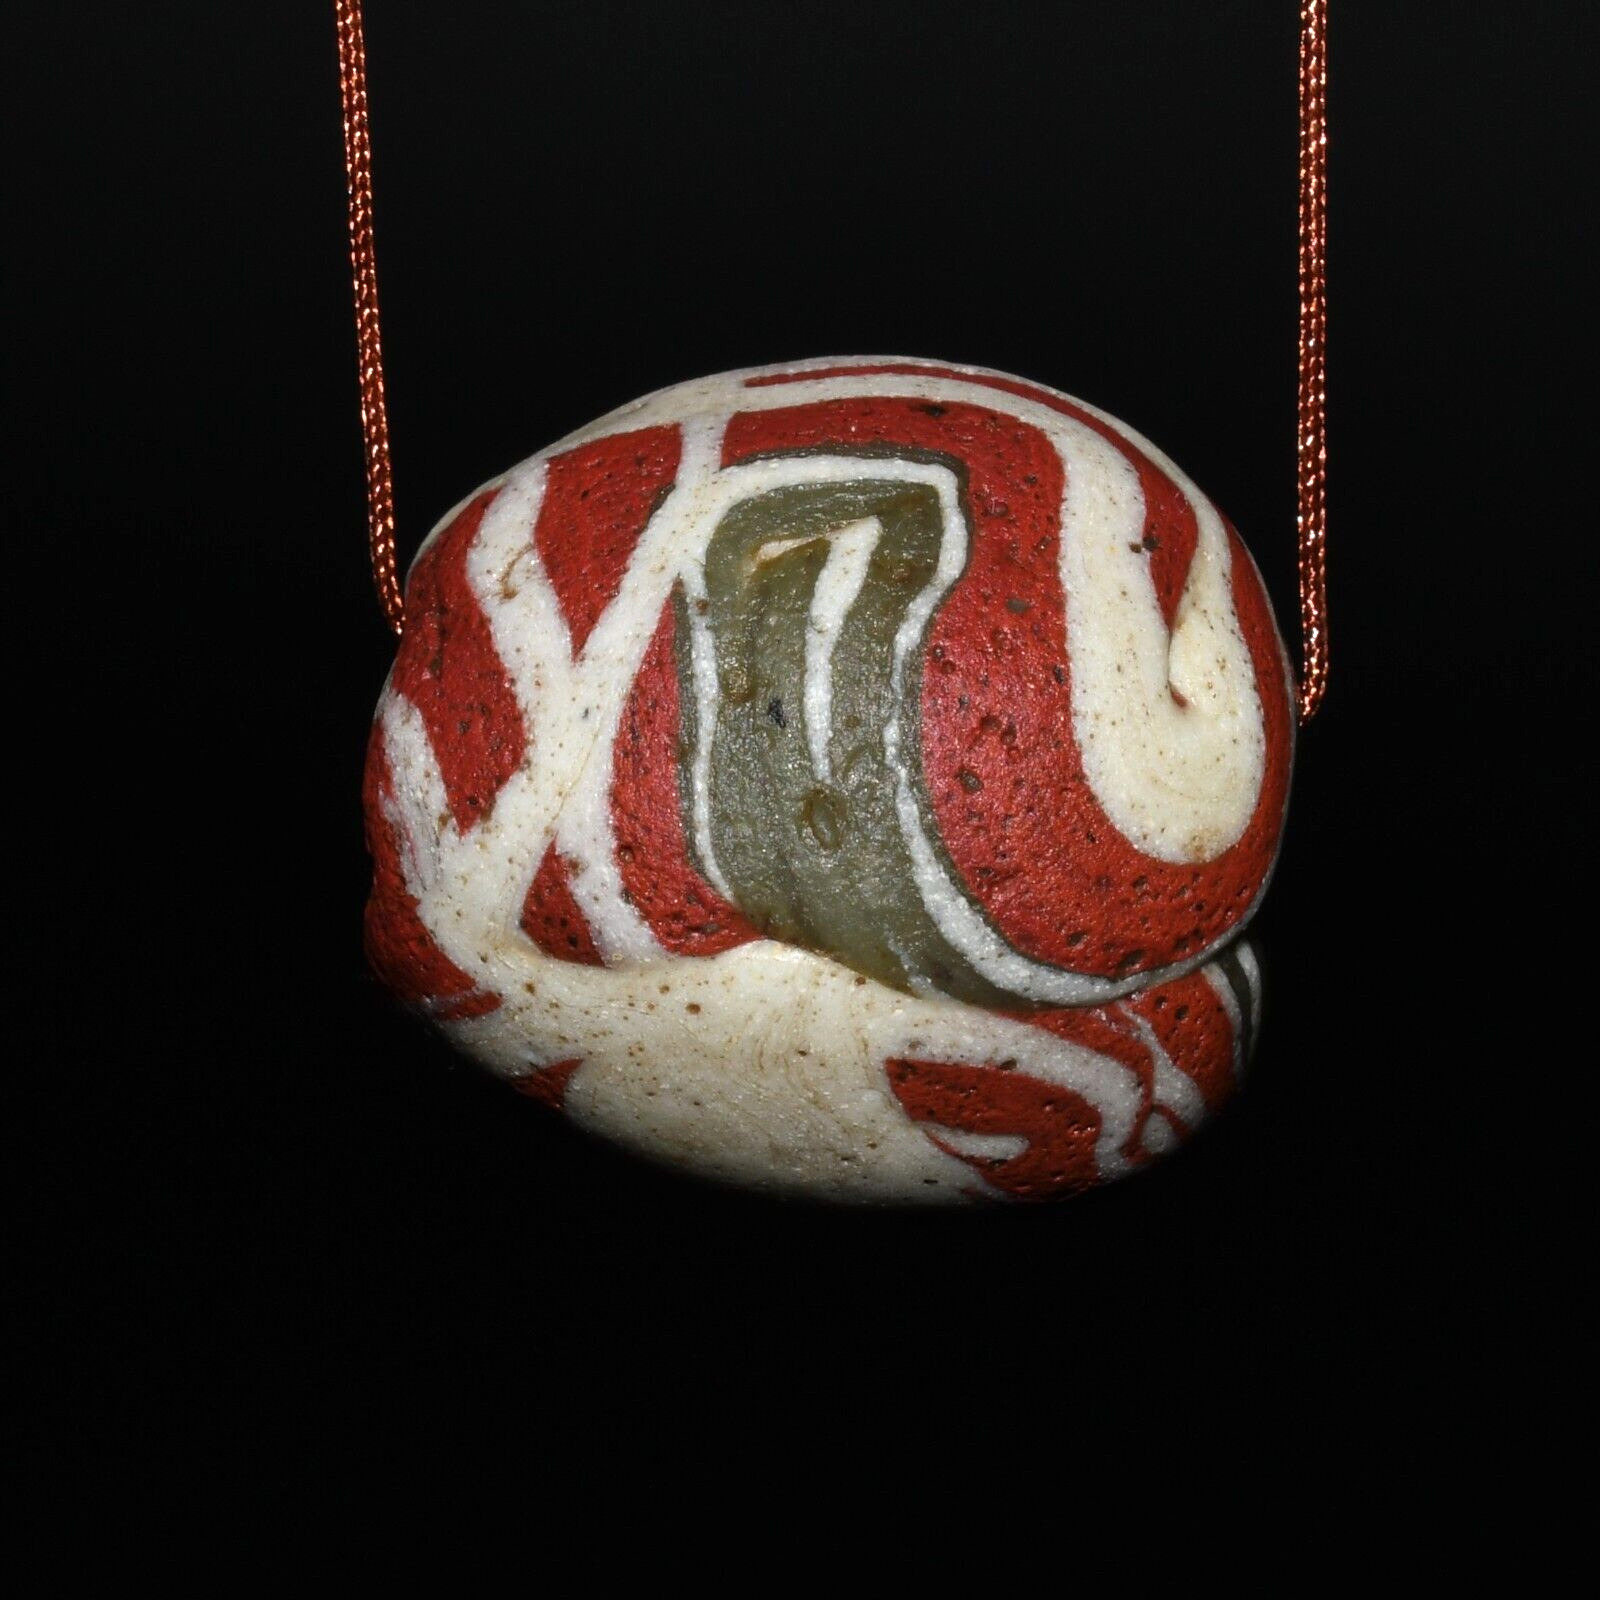 Big Ancient Mosaic Gabri Glass Bead with Multiple Colors Circa 2nd - 5th Century